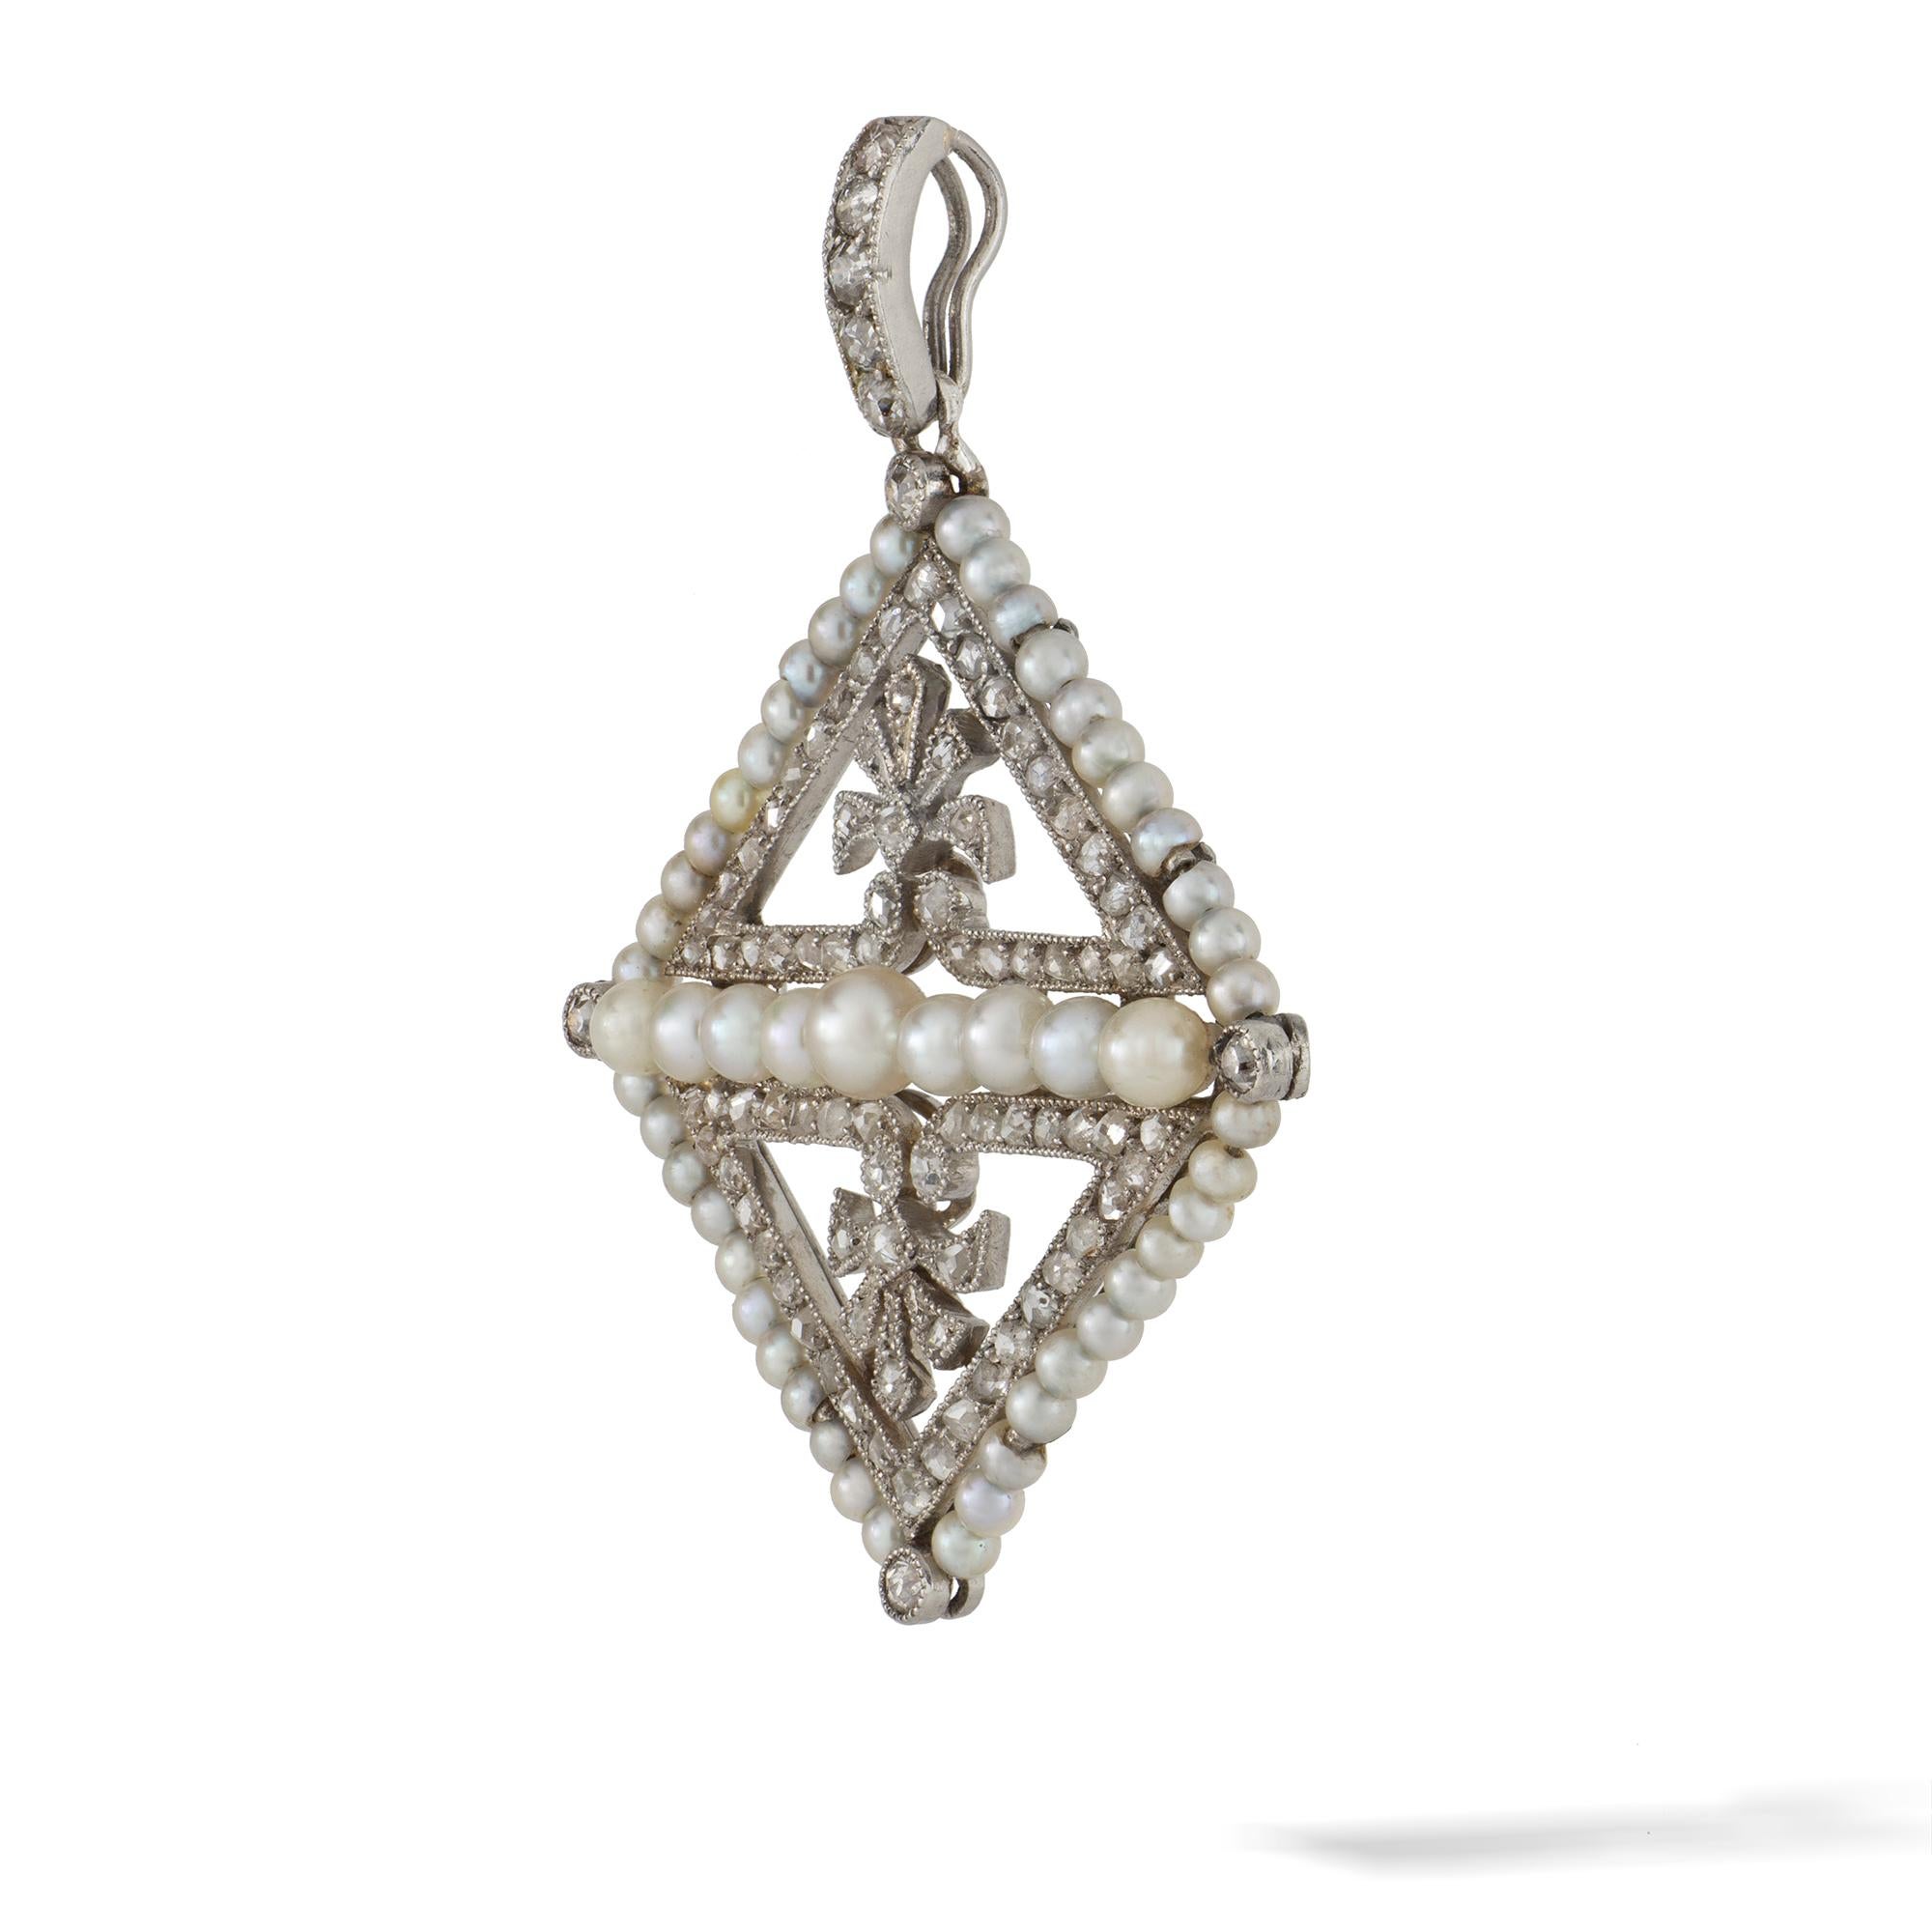 An Edwardian pearl and diamond kite-shaped pendant, centrally with nine pearls forming a line, between two rose-cut diamond-set triangles each centered with a diamond-set acanthus motif, all surrounded by a pearl and diamond cluster and suspended by